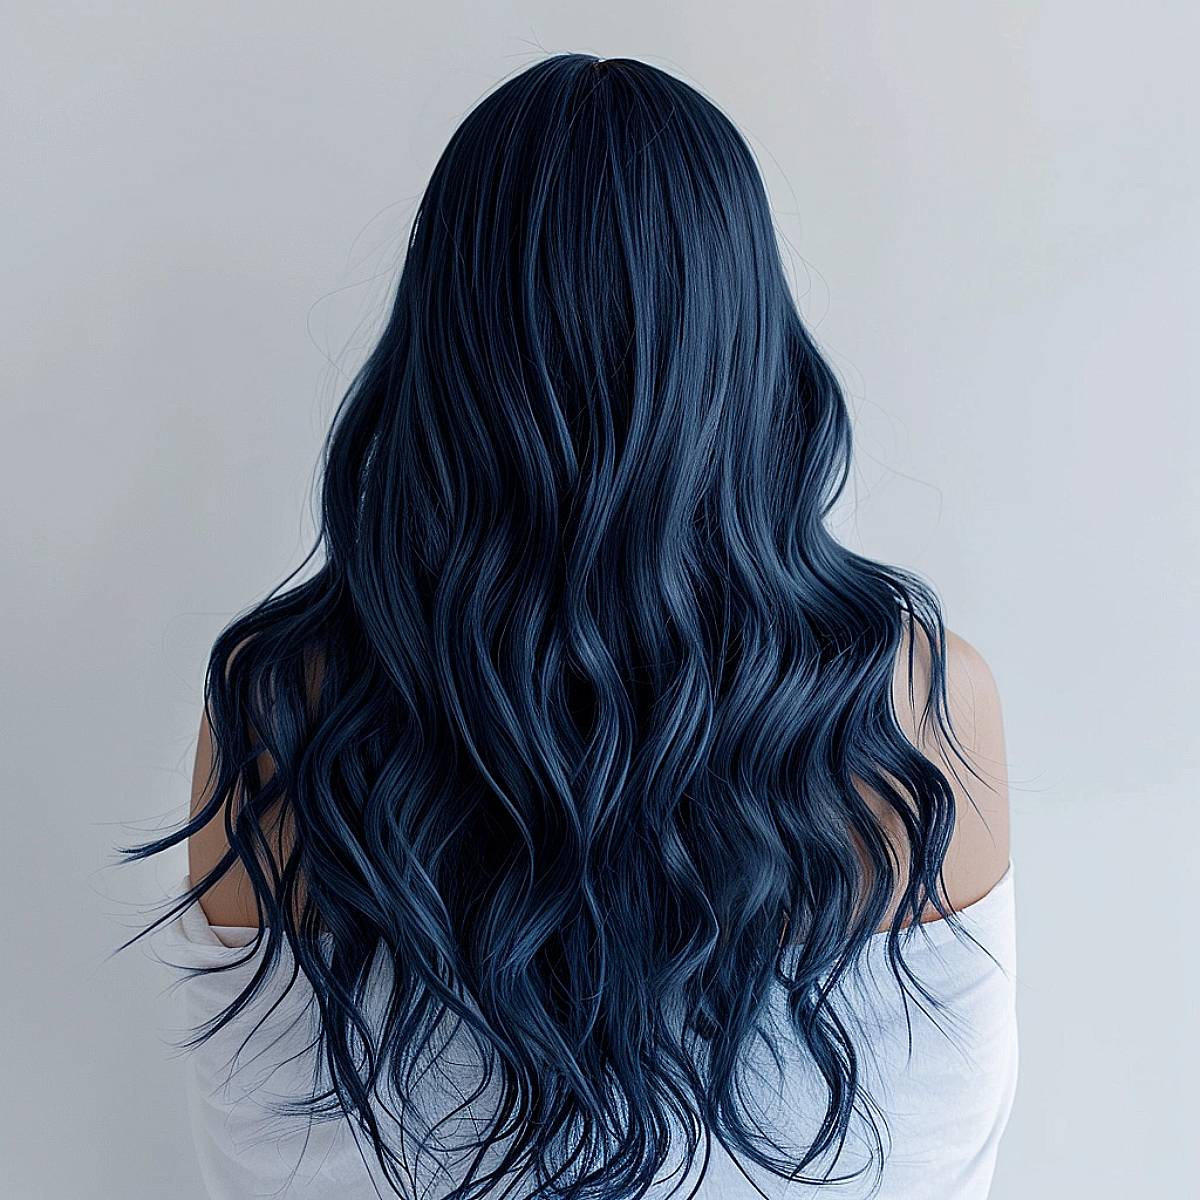 Inecto Keep Cool This Summer And Rock Deep Ocean Blue Hair, 42% OFF